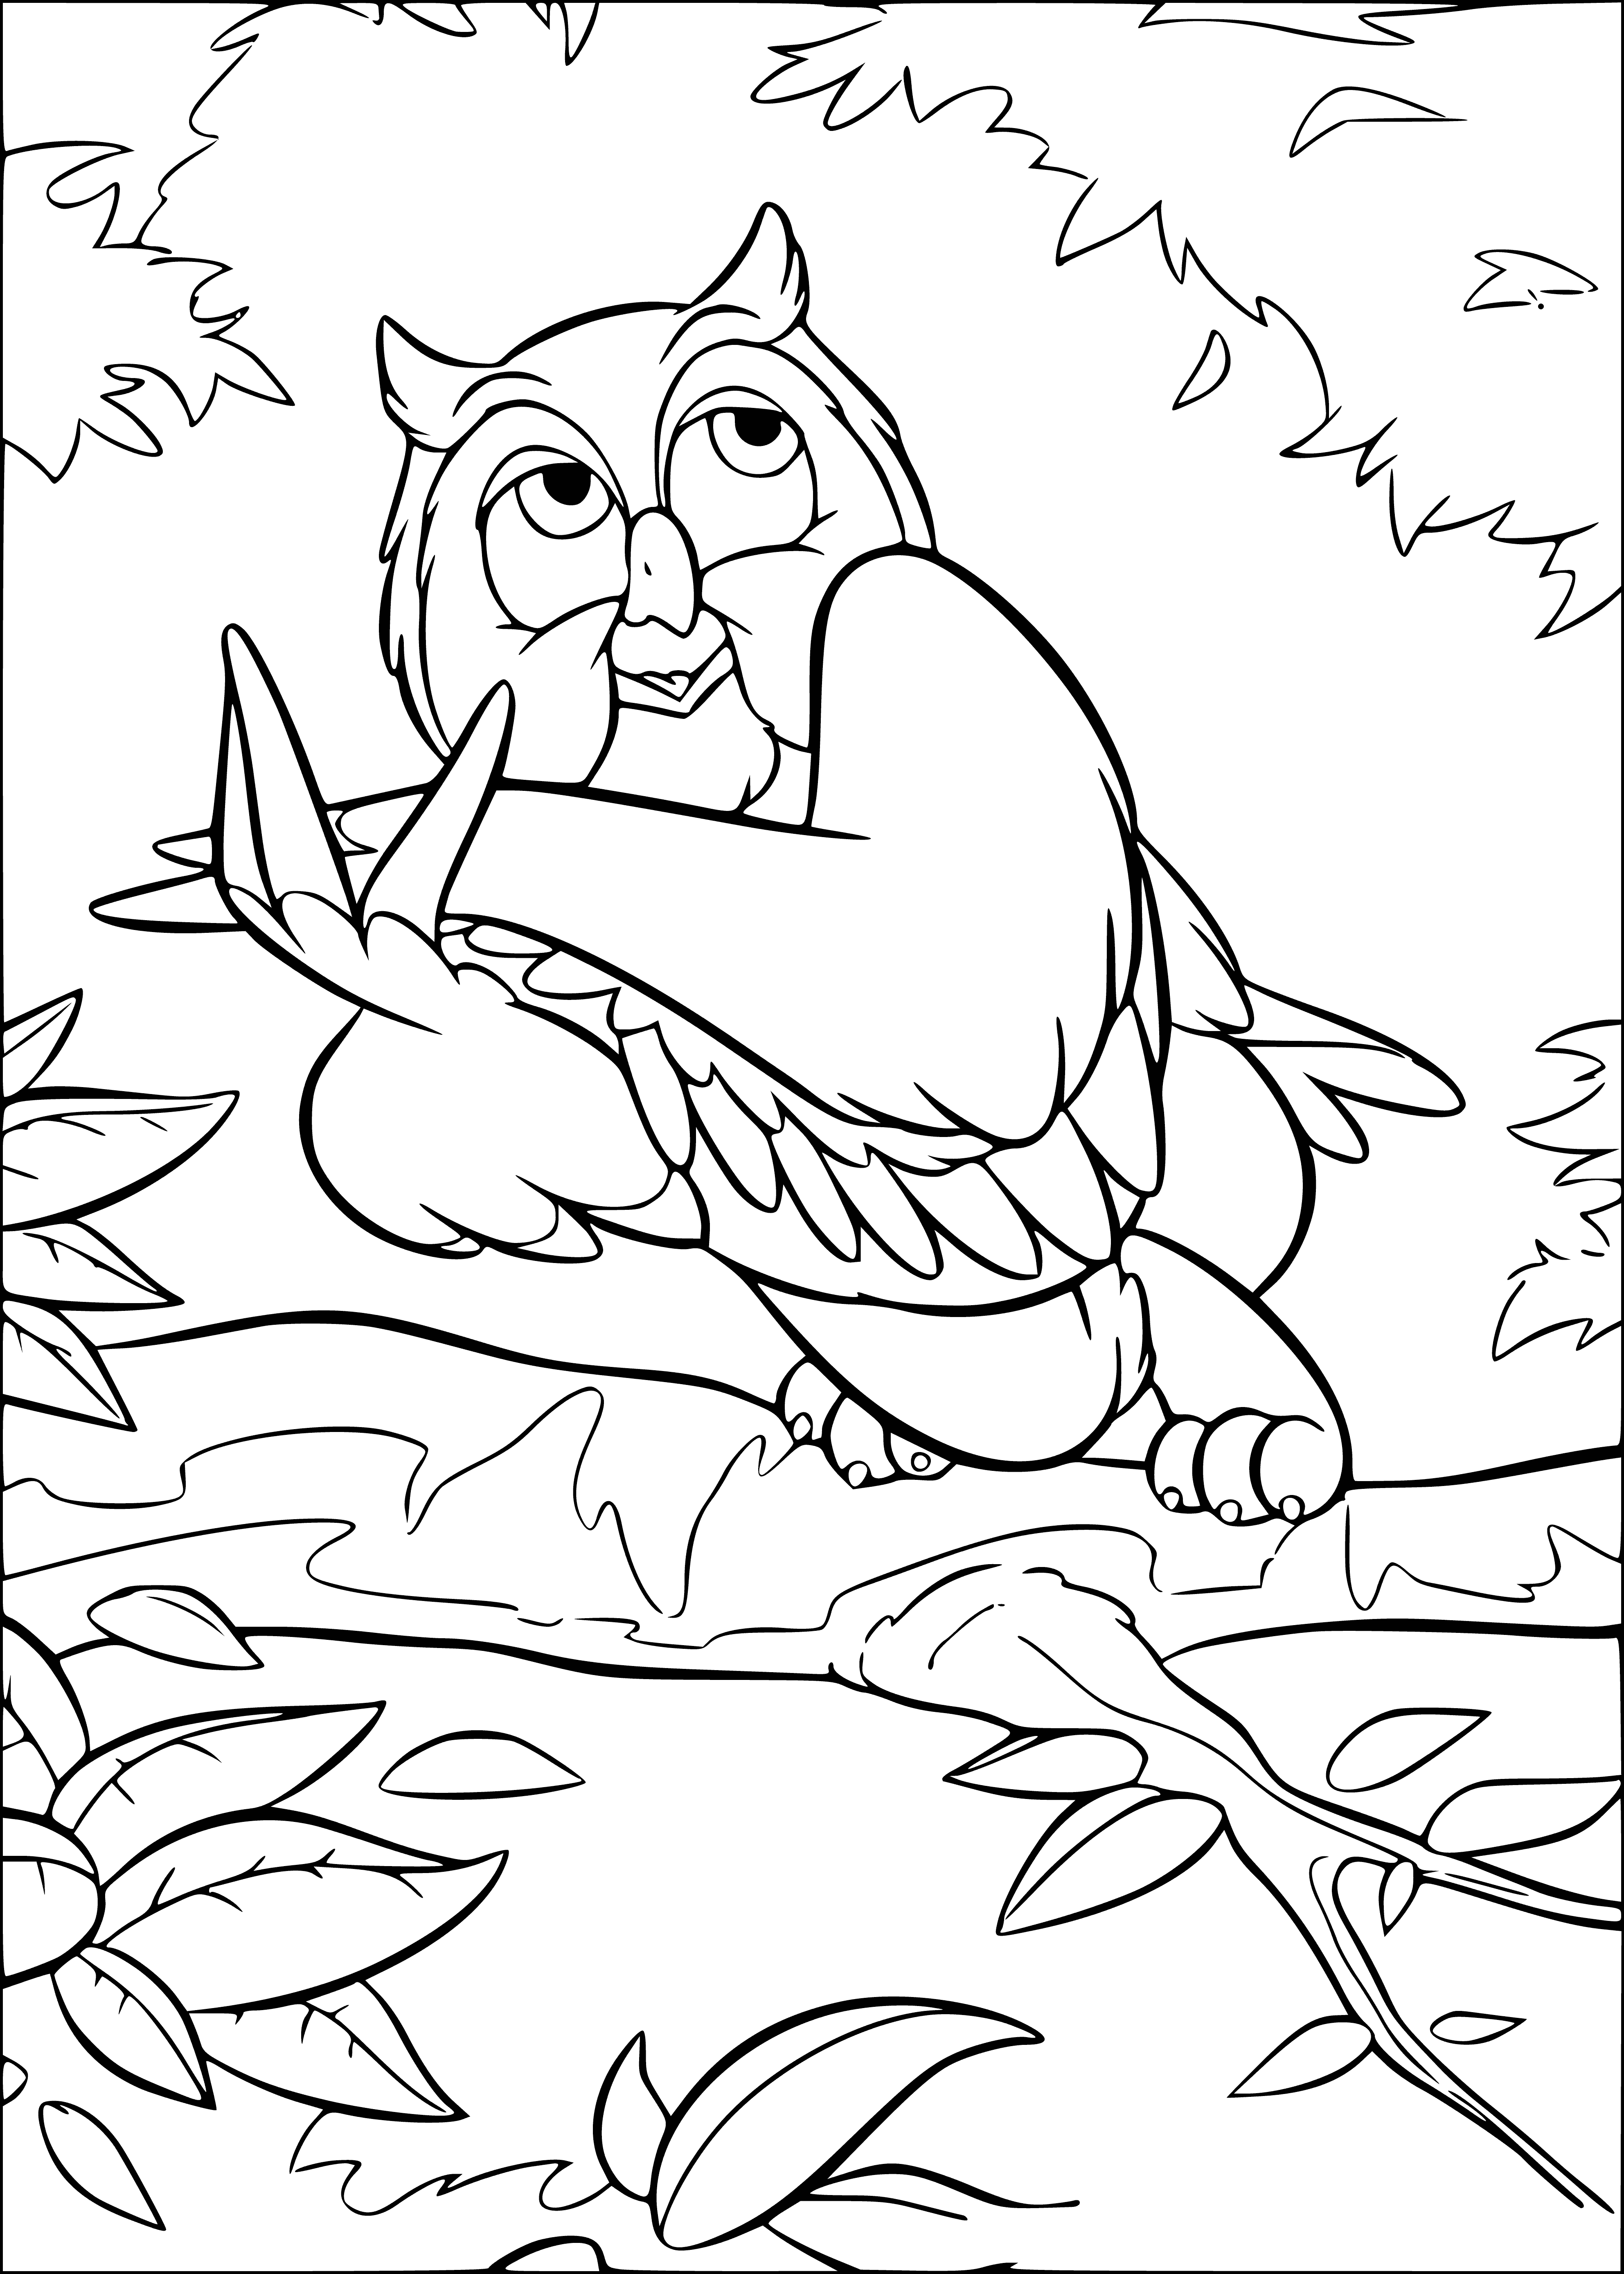 coloring page: Small, brown owl on a tree branch with large, round eyes and white abdomen, looking straight ahead.